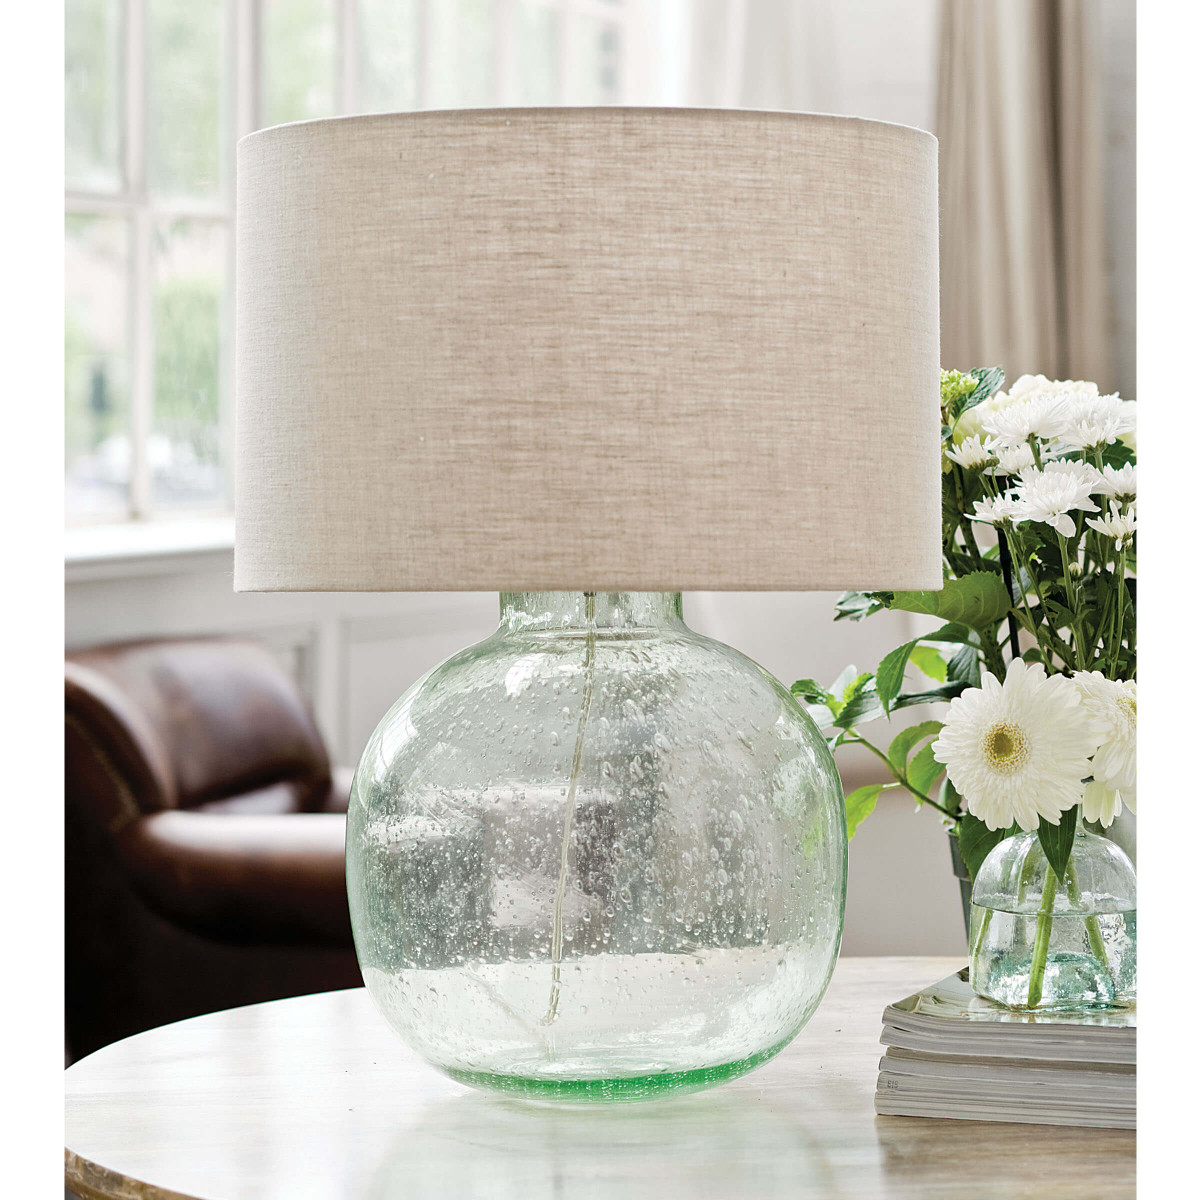 Green Recycled Glass Table Lamp-$425.00